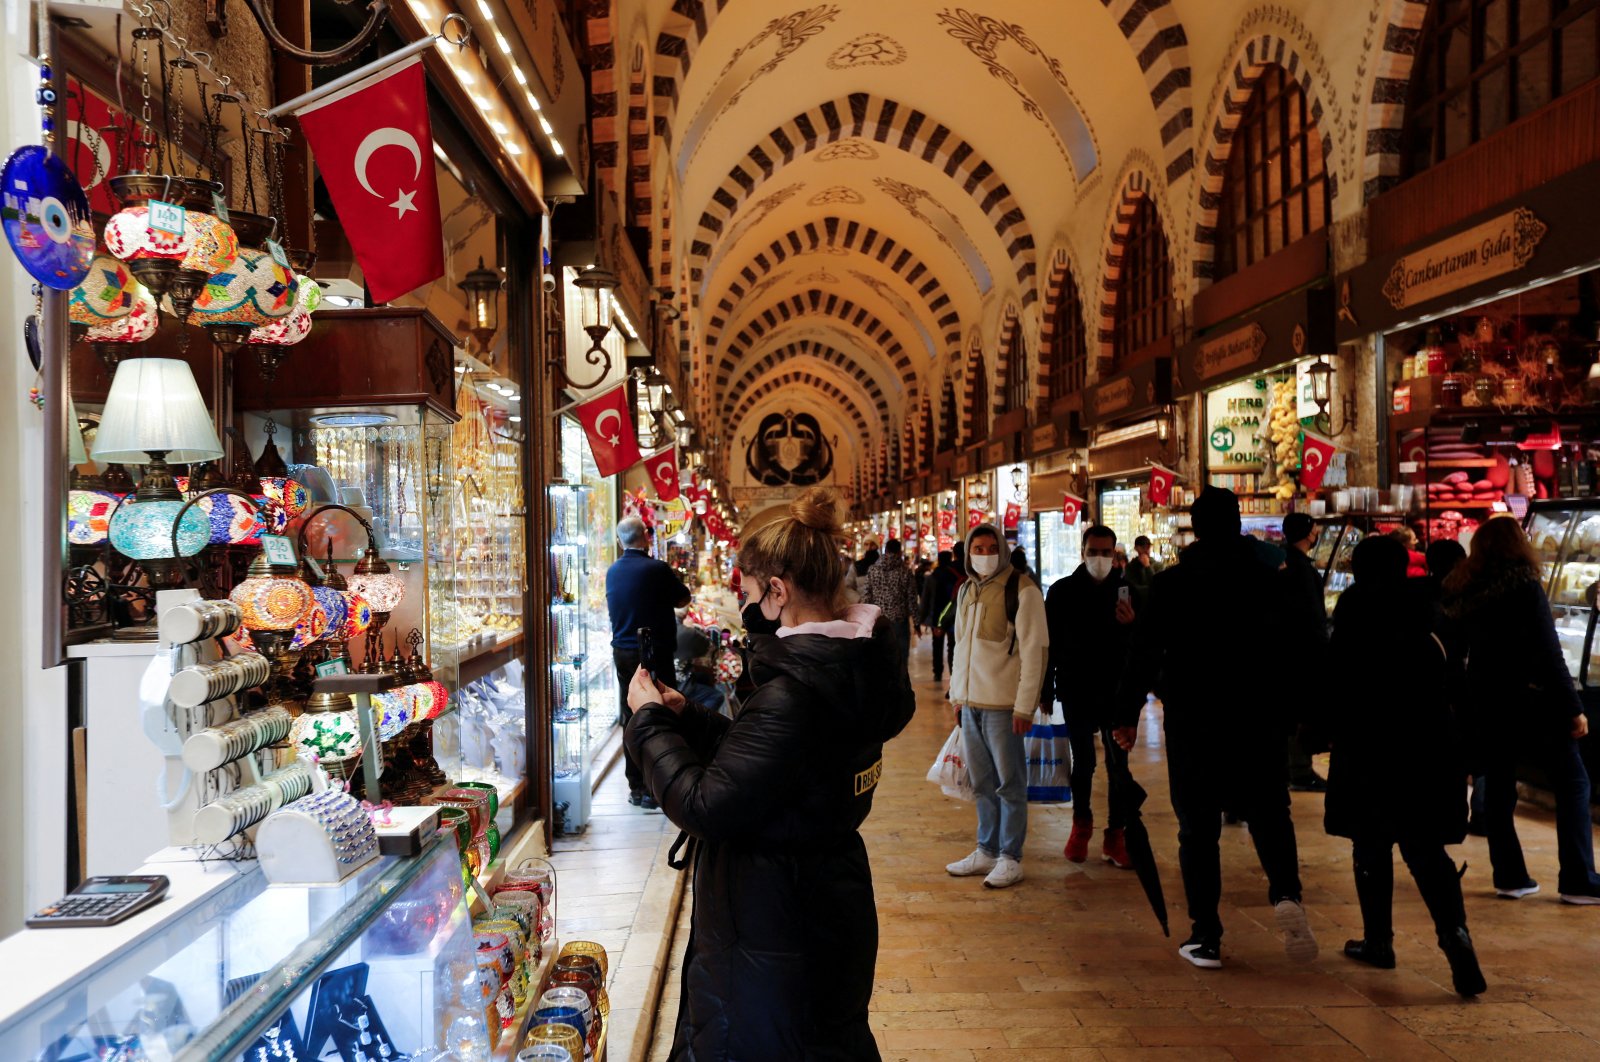 People shop at the Spice Market, also known as the Egyptian Bazaar, in Istanbul, Turkey, Dec. 16, 2021. (Reuters Photo)